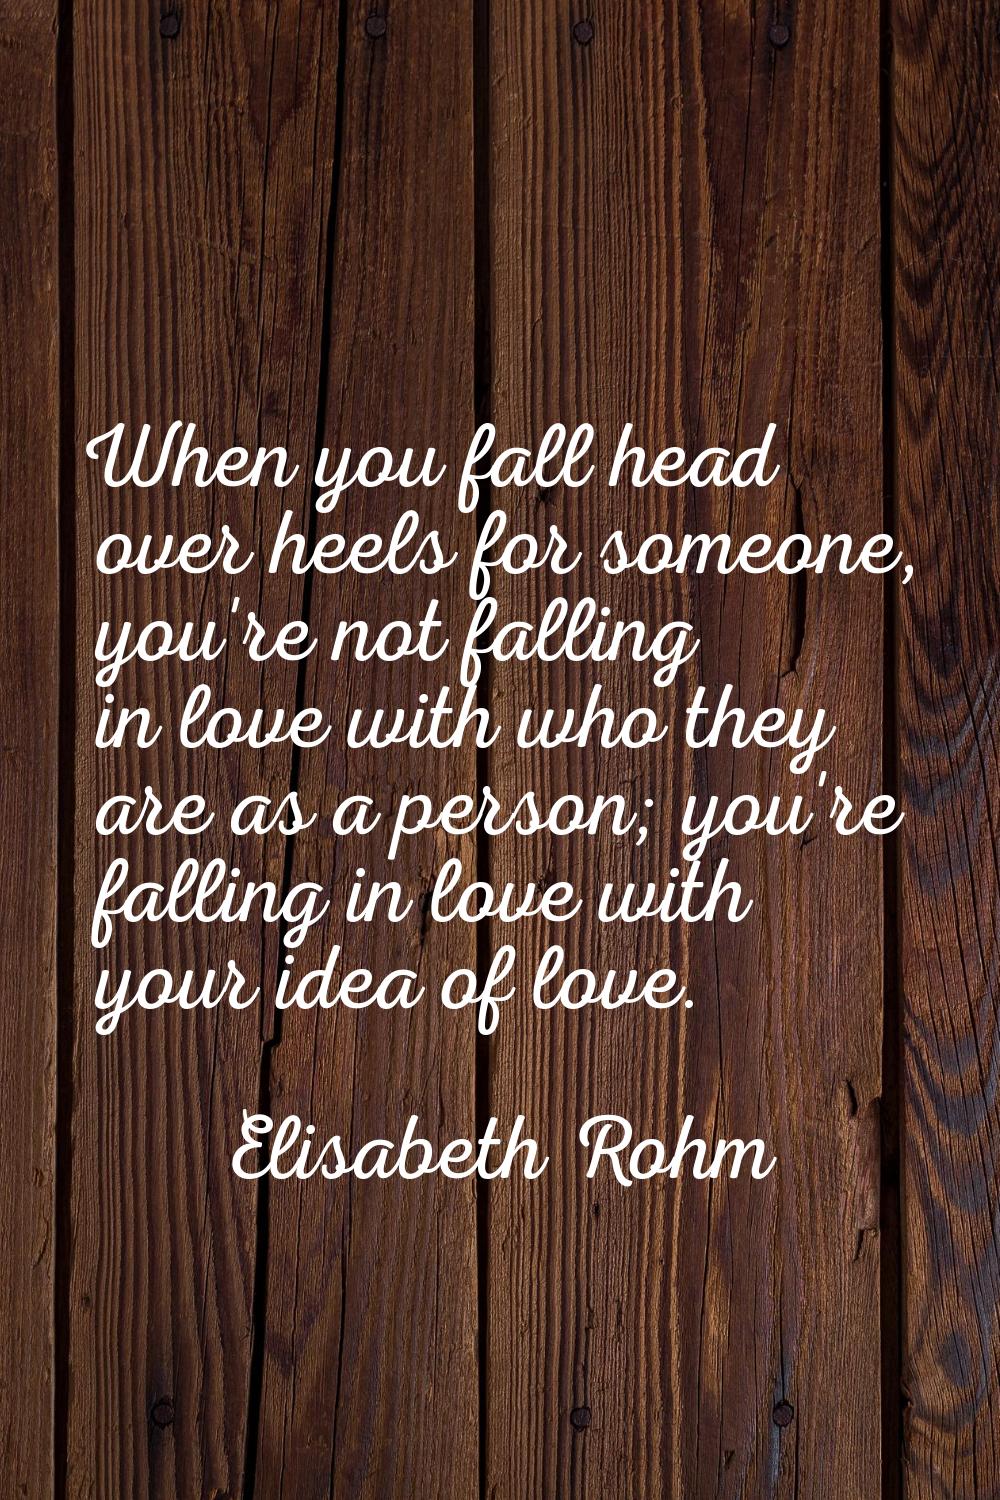 When you fall head over heels for someone, you're not falling in love with who they are as a person